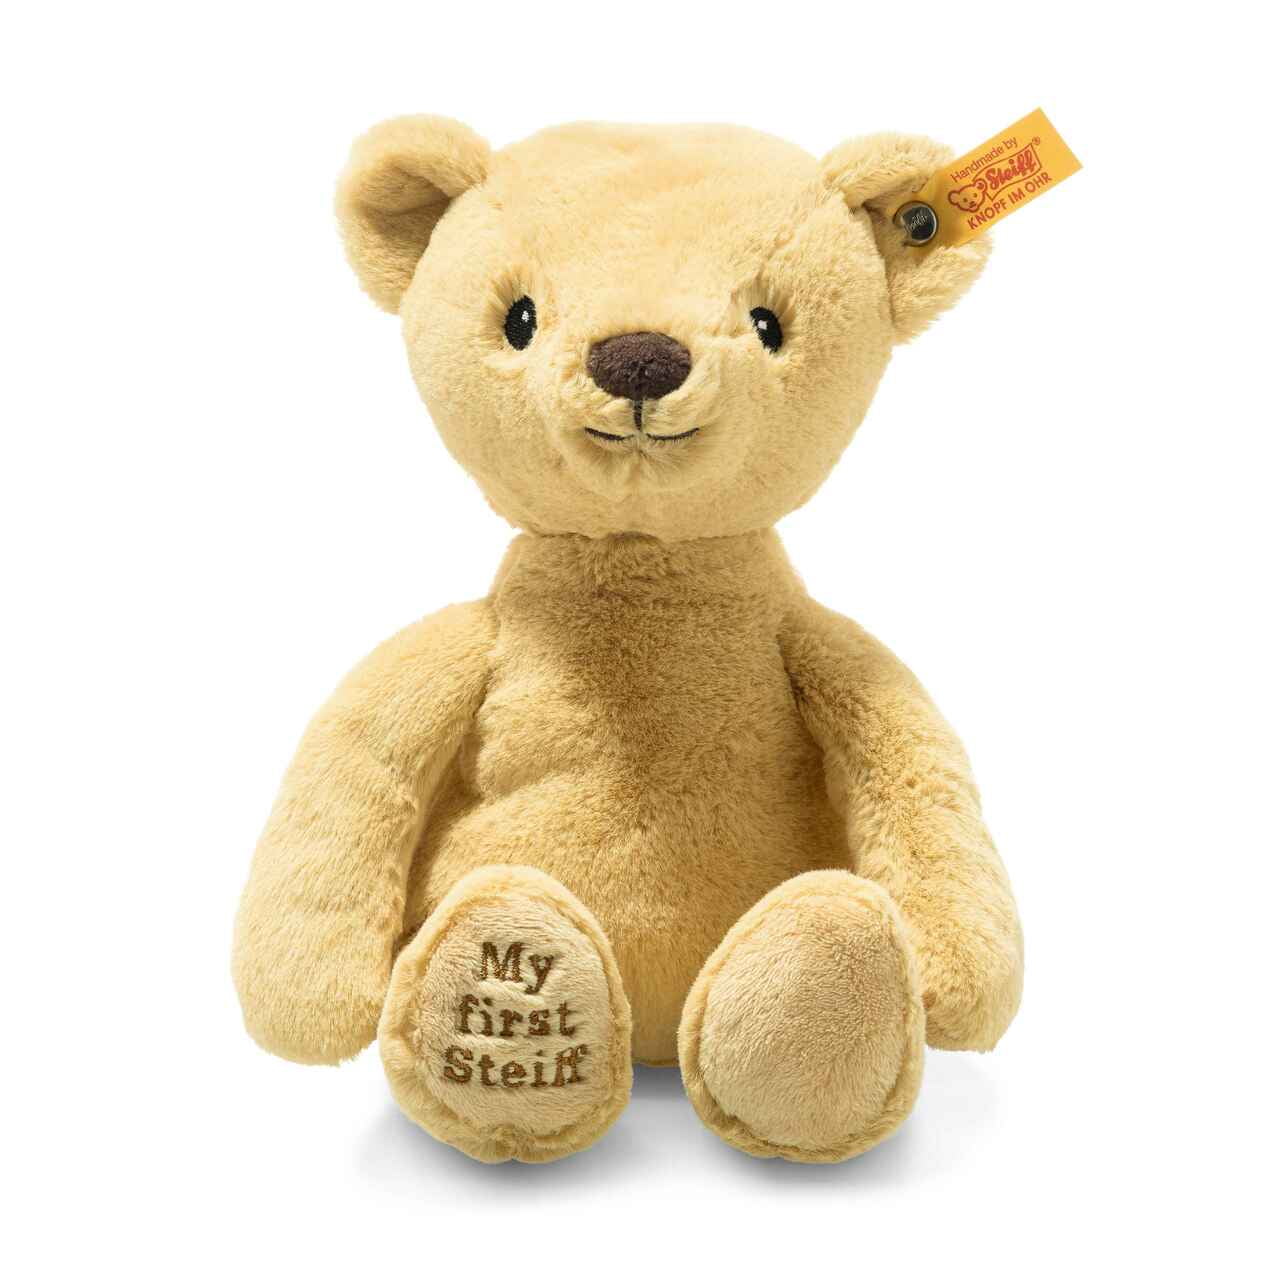  Inventiv Teddy Bear with Pouch, Easily Insert a